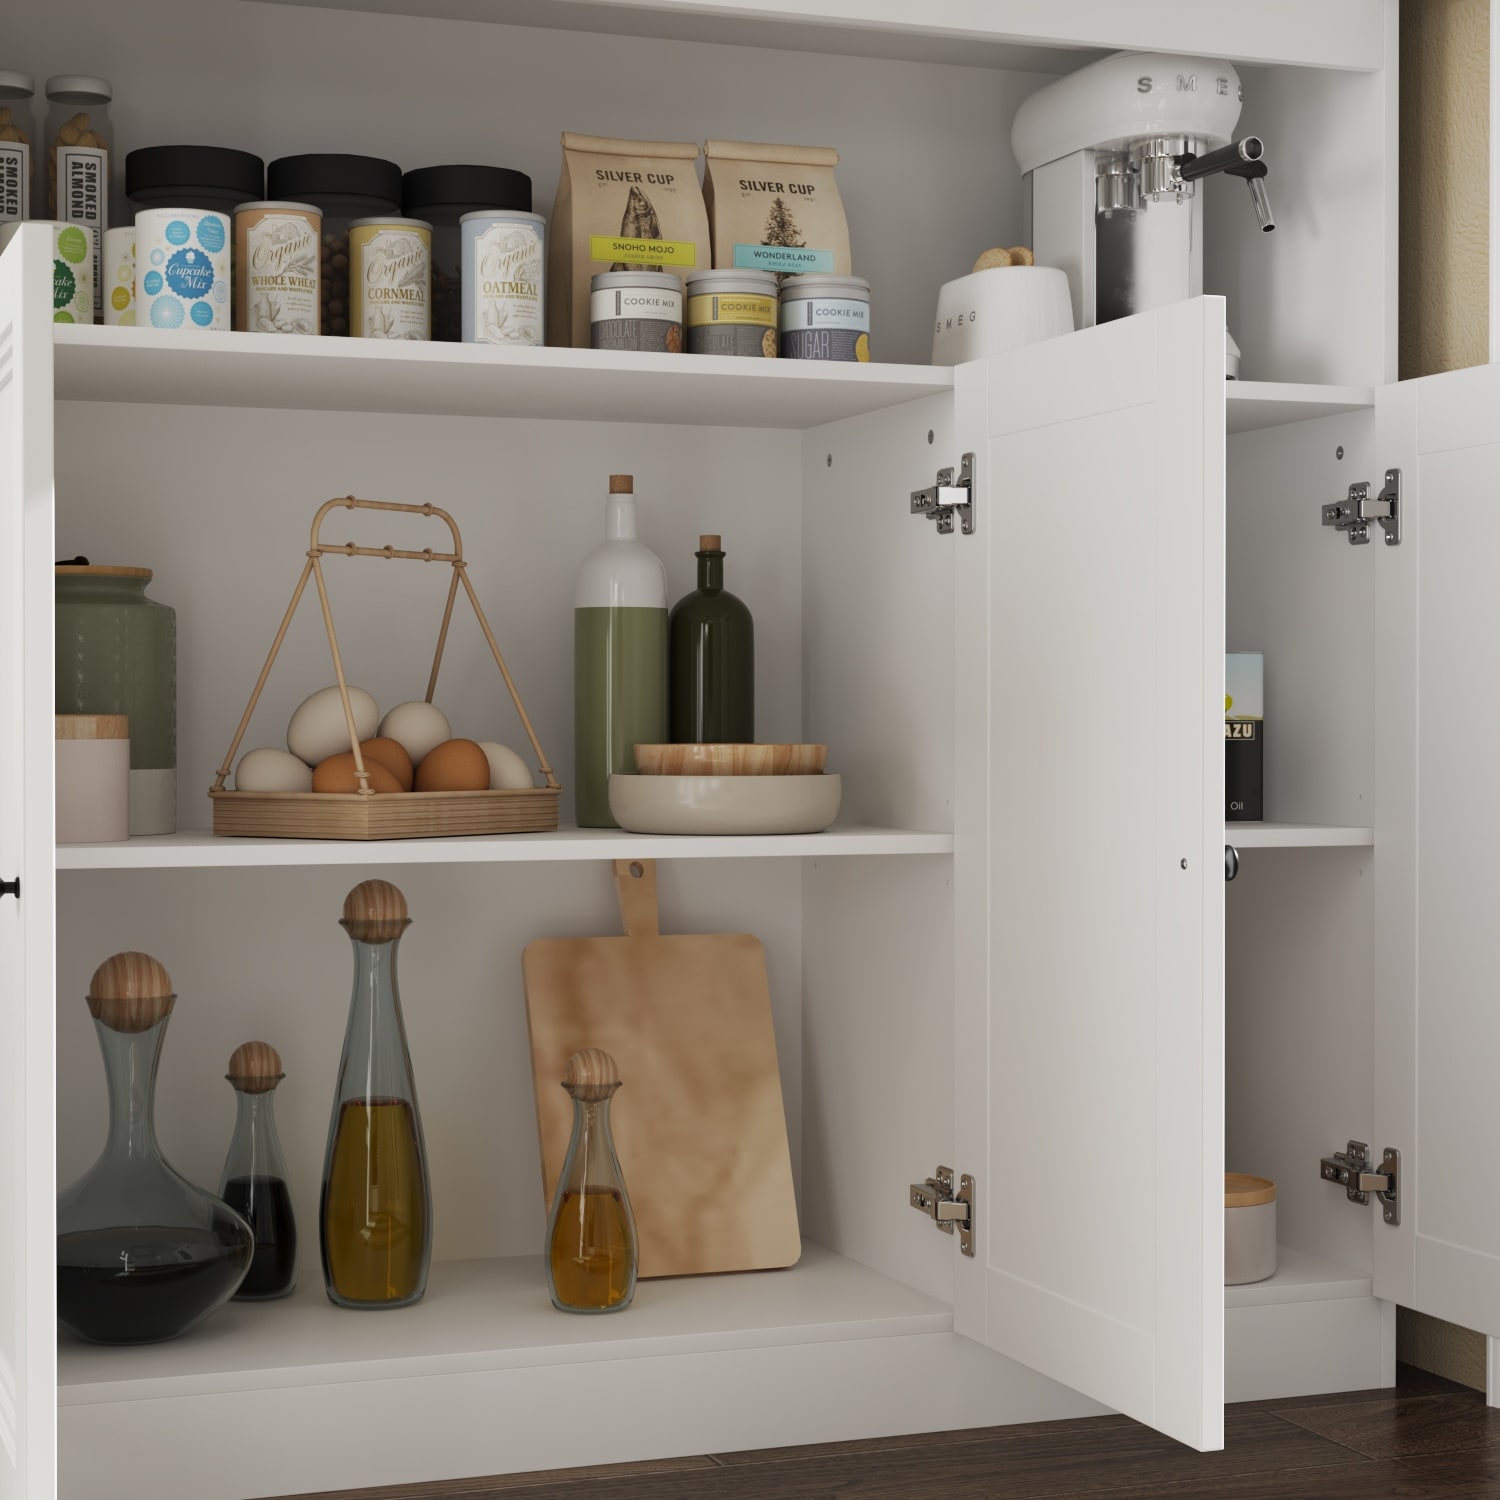 https://ak1.ostkcdn.com/images/products/is/images/direct/5b781304e8e9e9f9d93fb7ff107284ffa5831cea/Pantry-Cabinet-w-Glass-Doors-Glass-Door-Storage-Cabinet-Accent-Cabinet.jpg